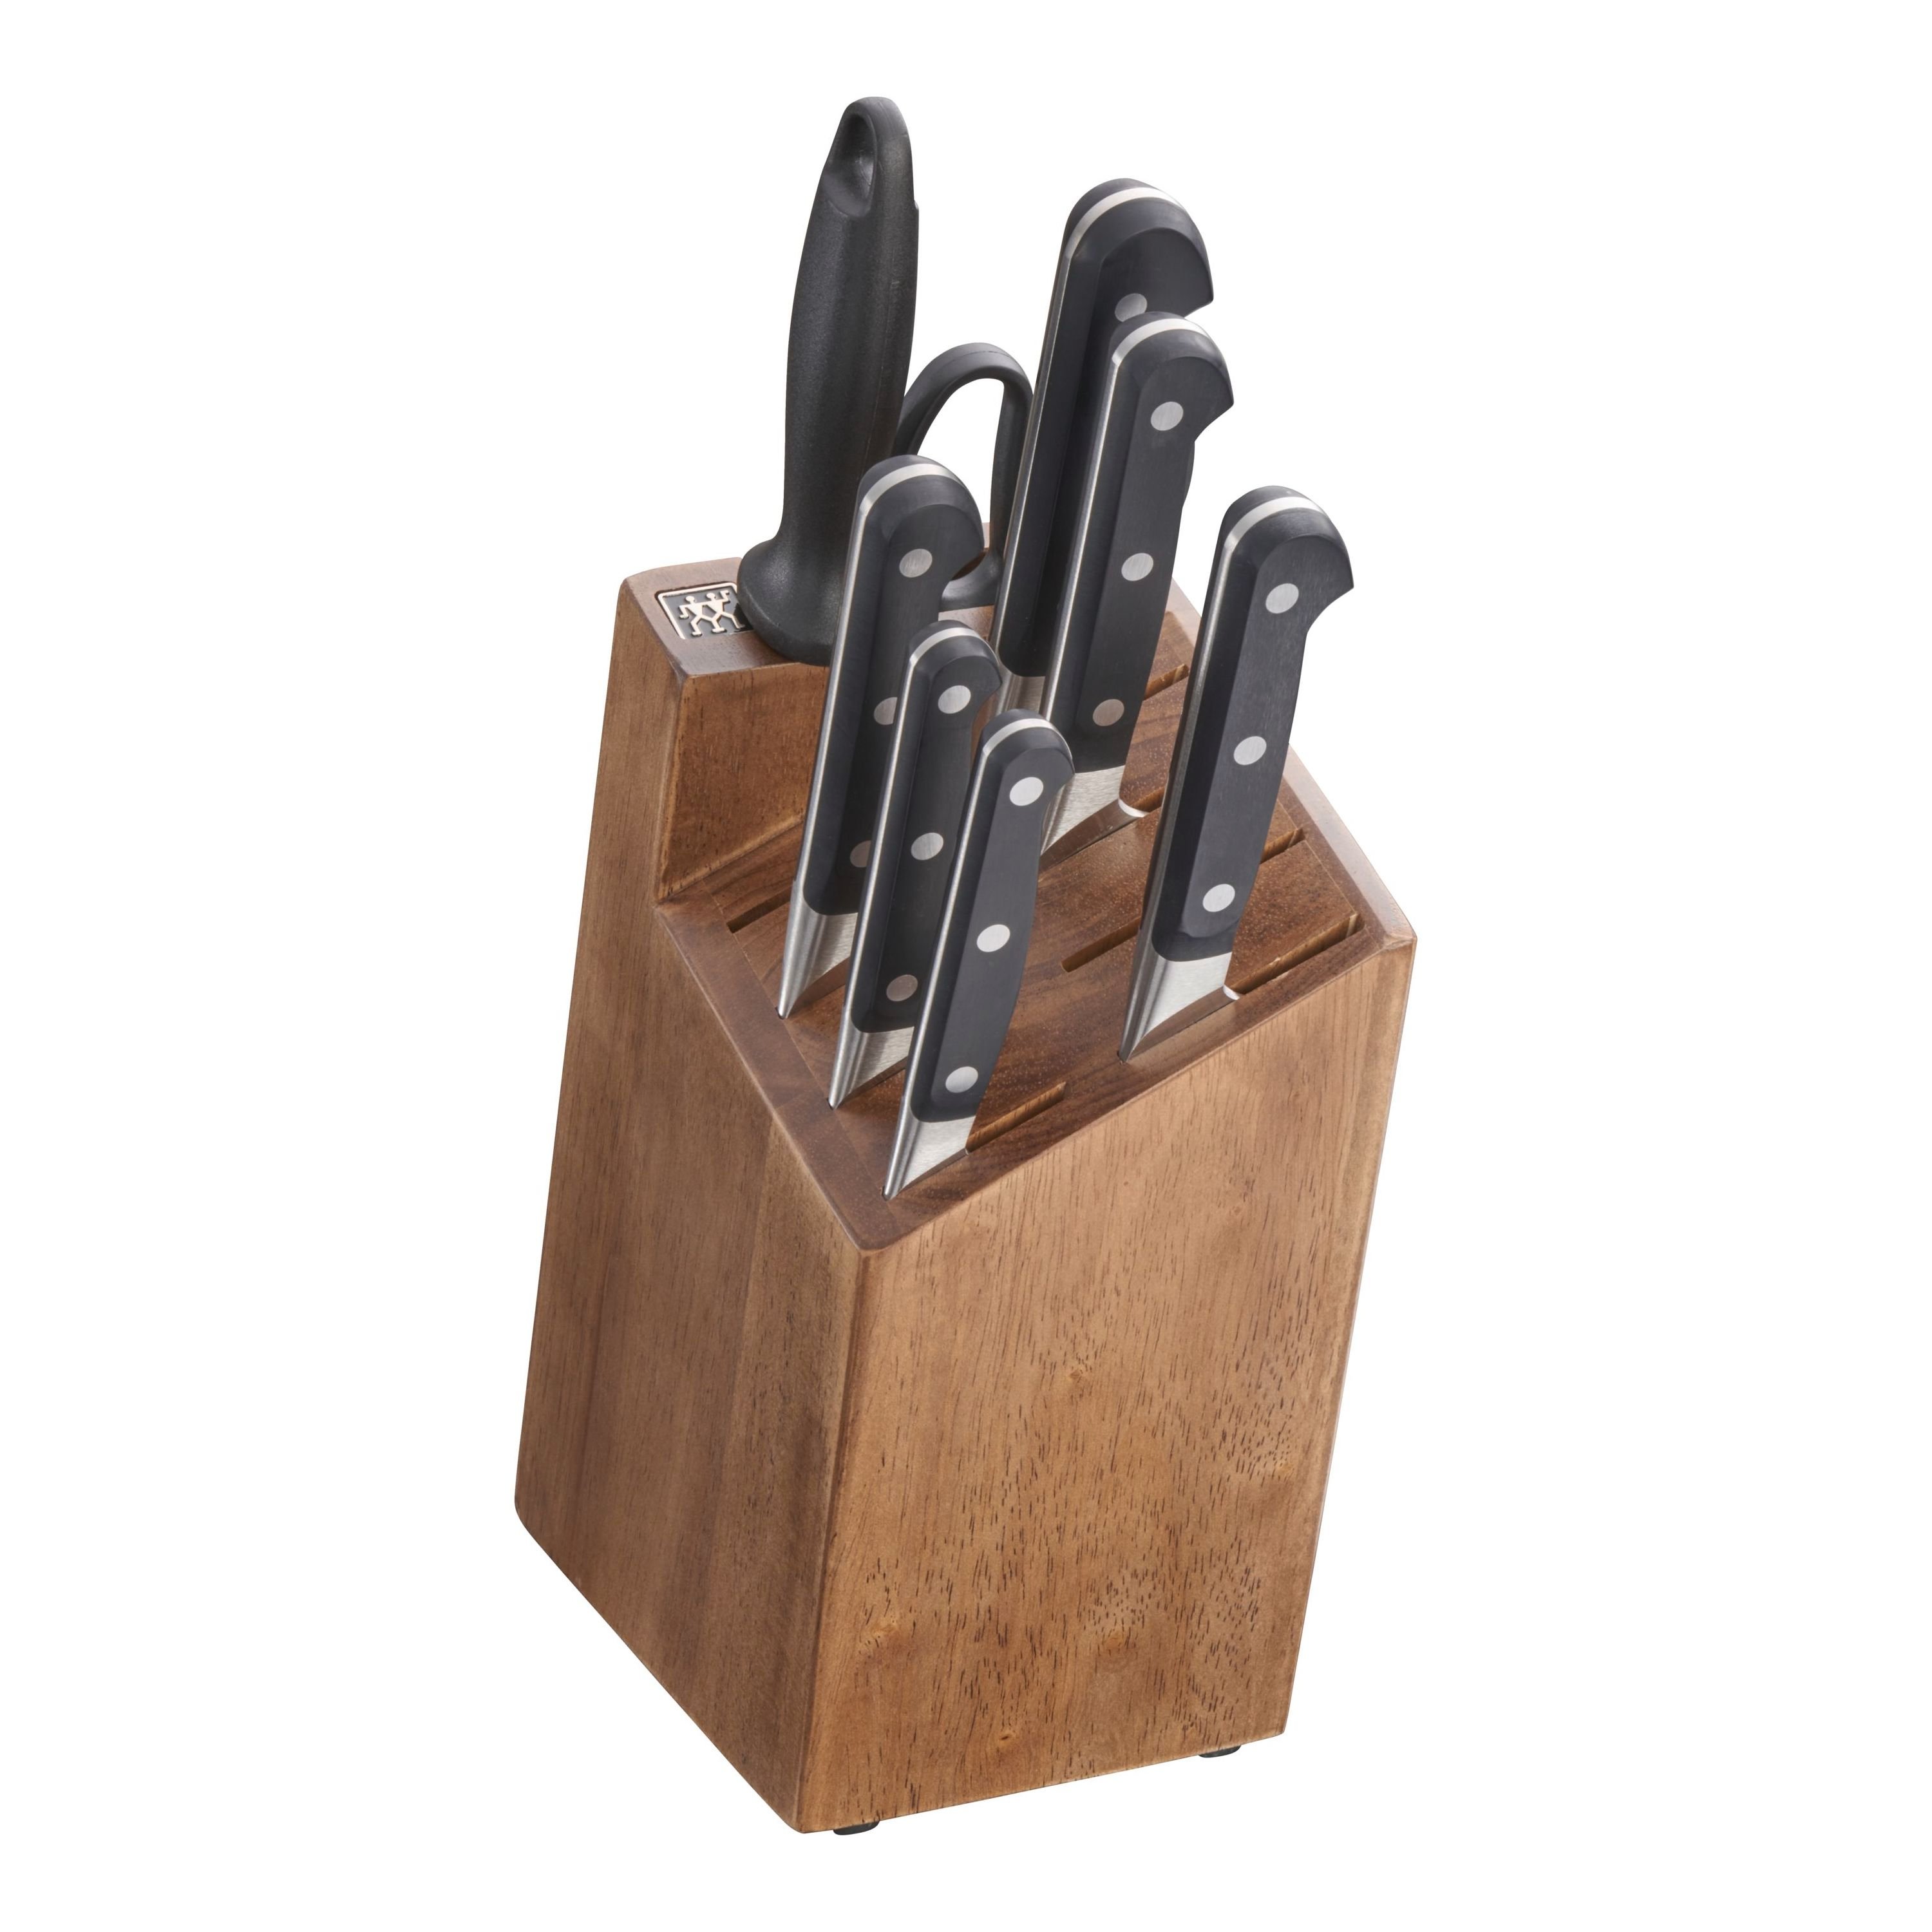 GIVEAWAY!! Zwilling Pro 9-Piece Knife Set ($890 Value